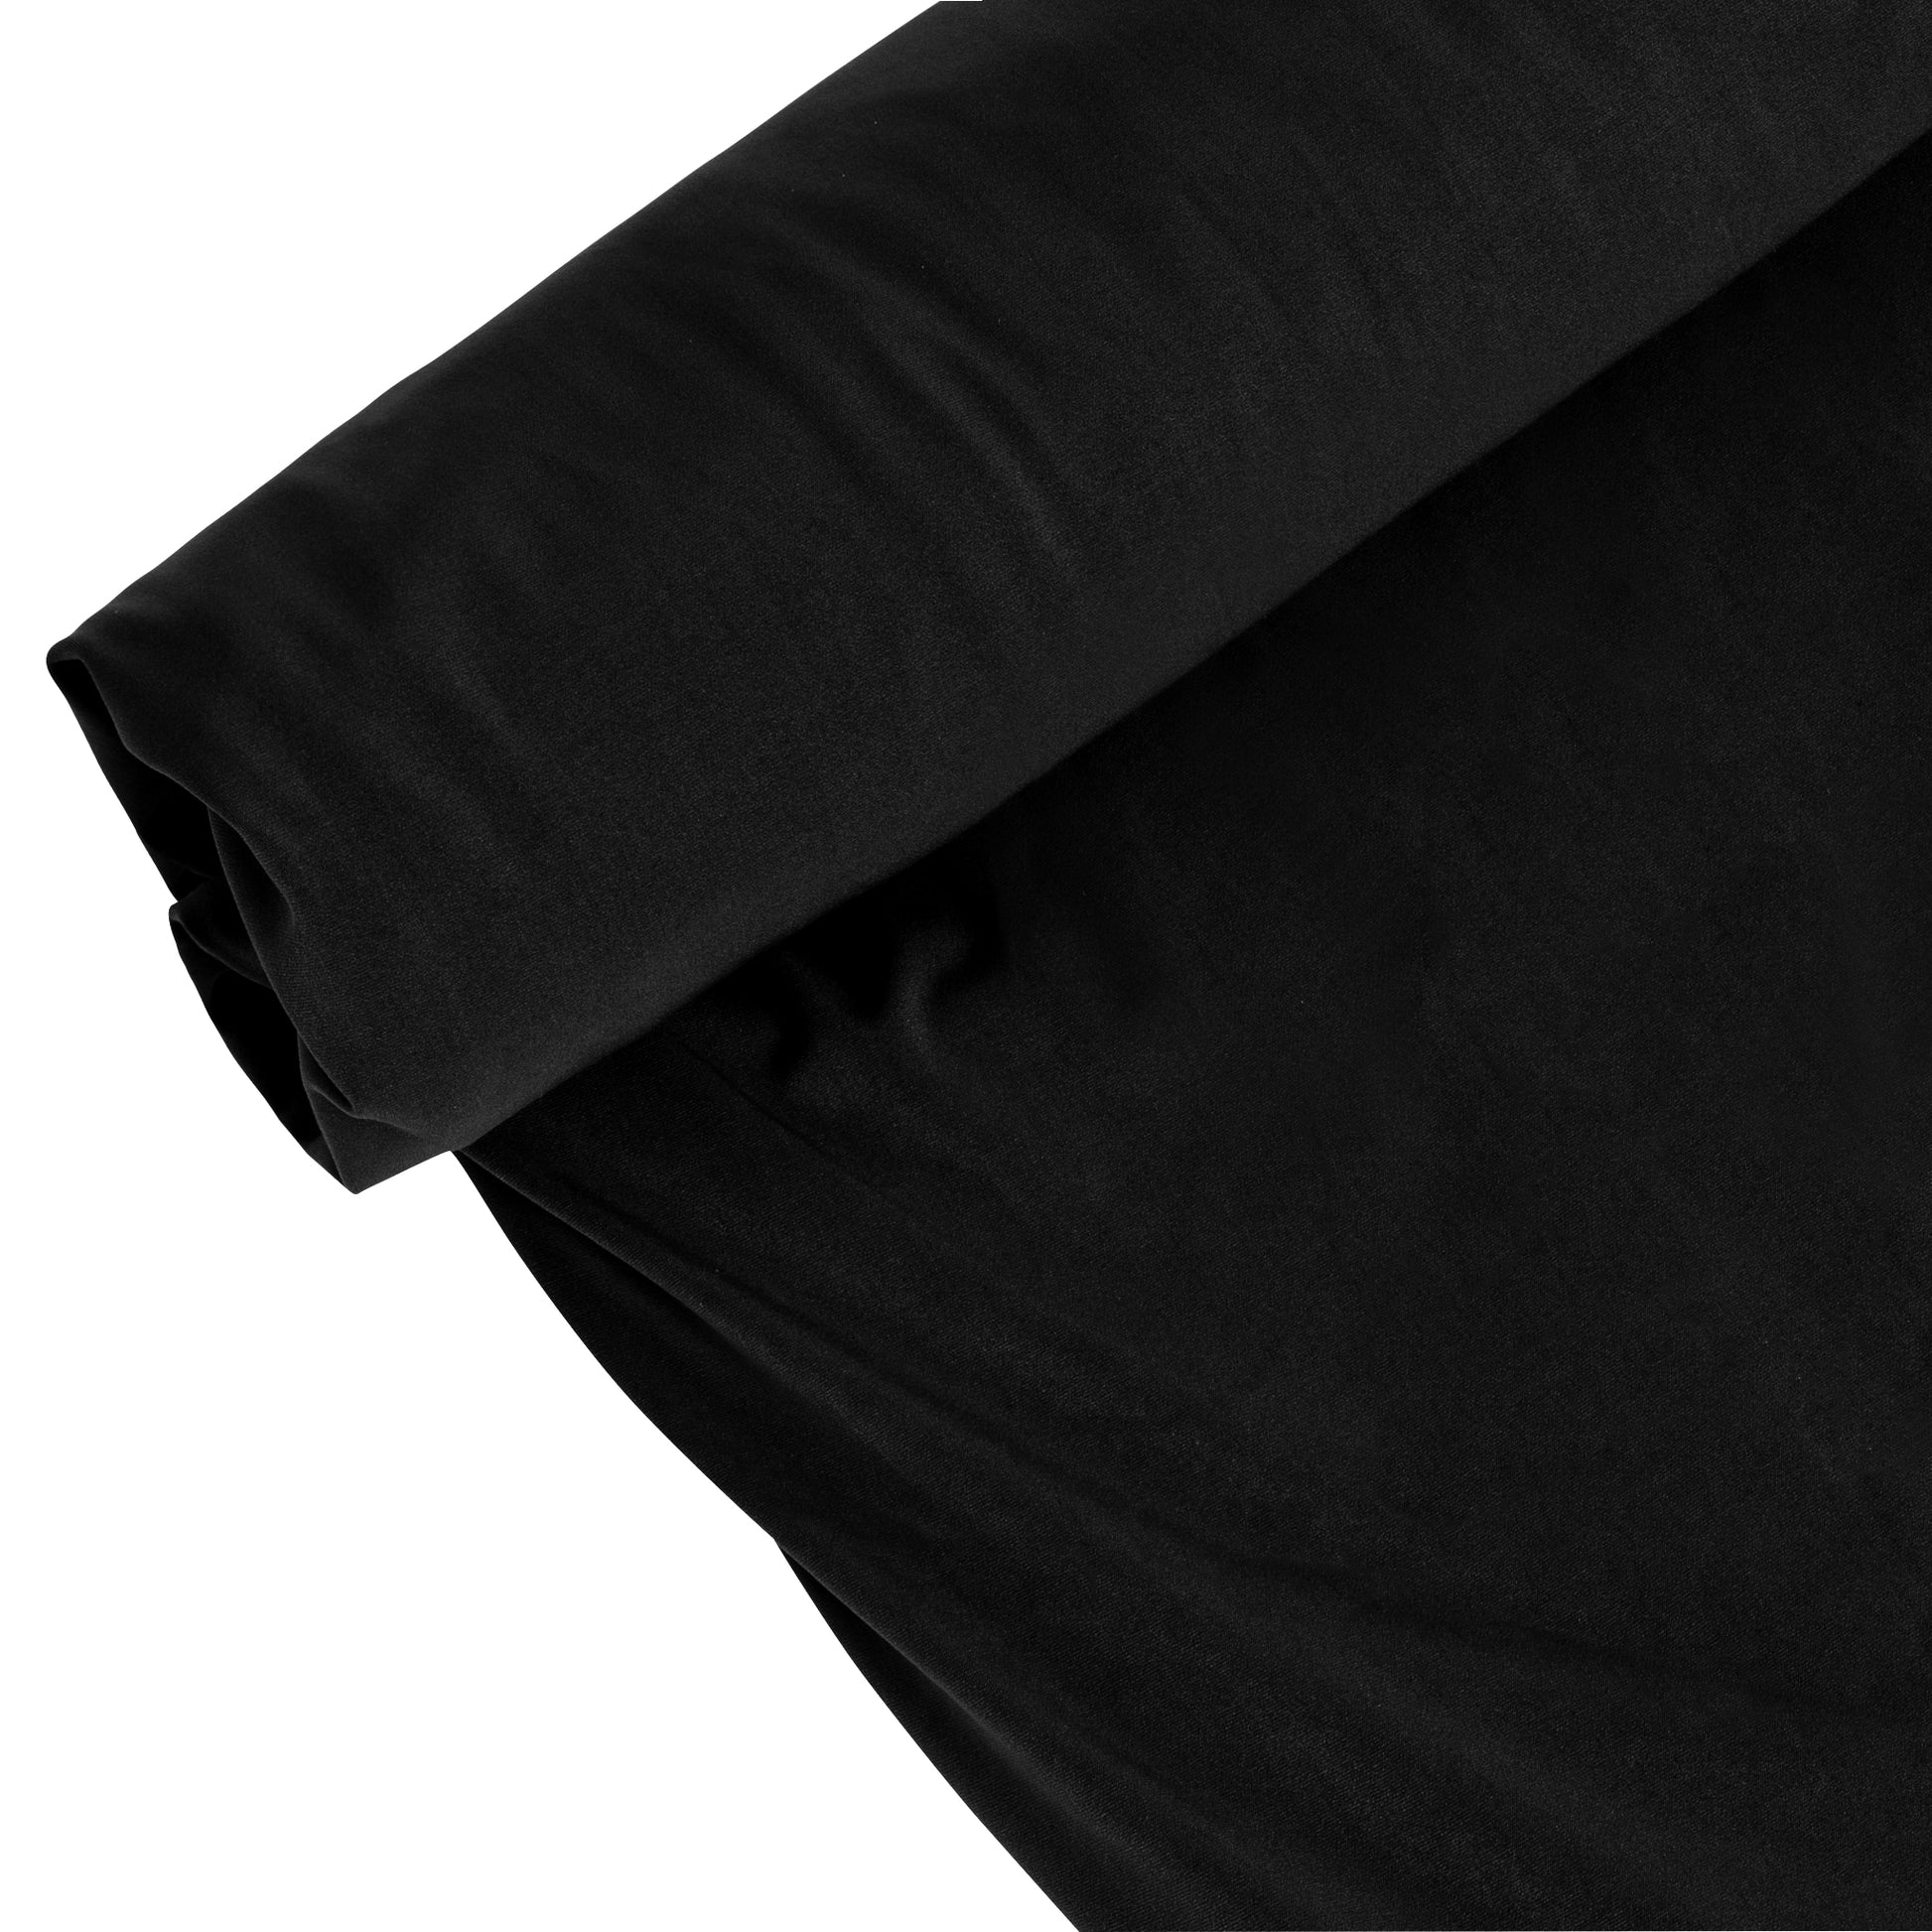 Polyester Taiwan 4 Way Lycra Fabric Black 60 Inch in Goa at best